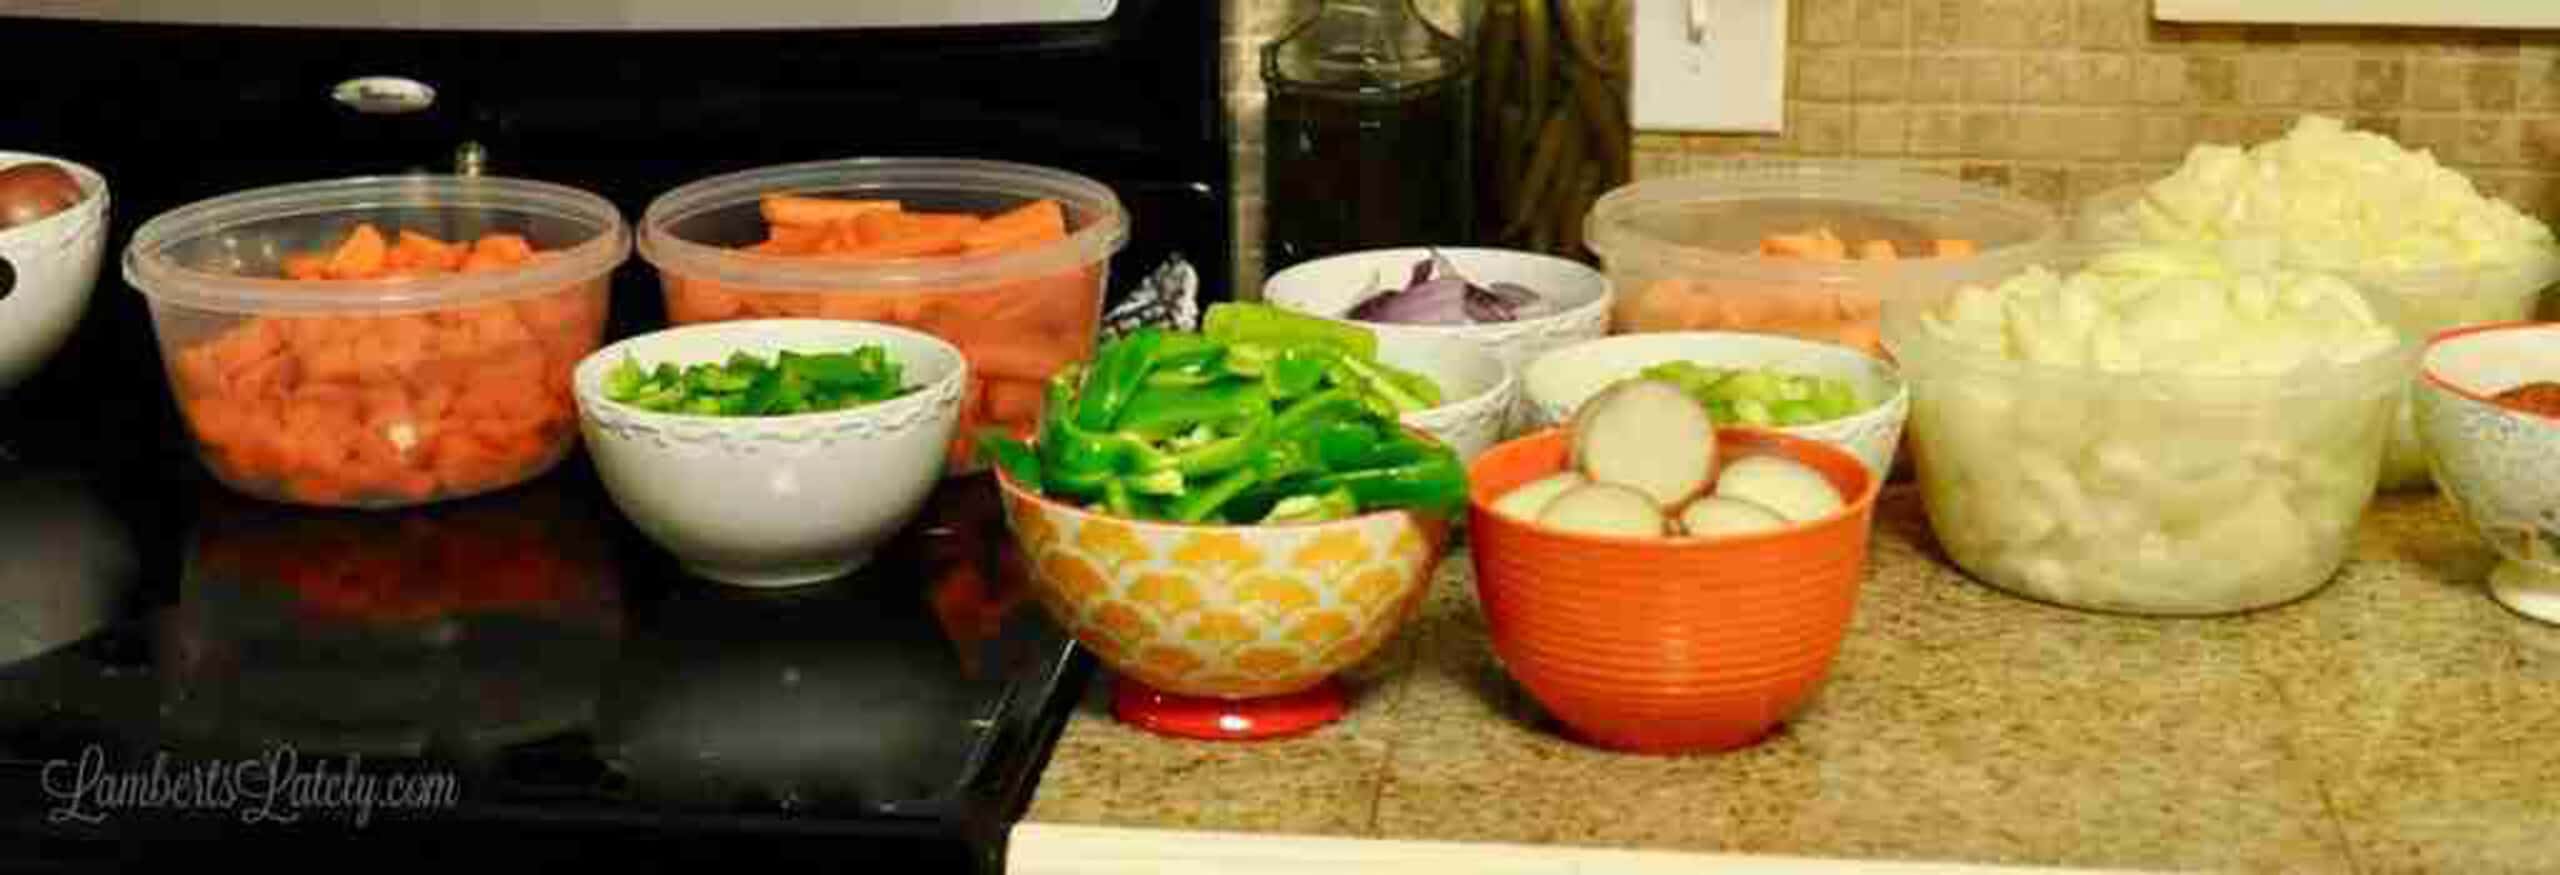 vegetables set up buffet style on a counter.